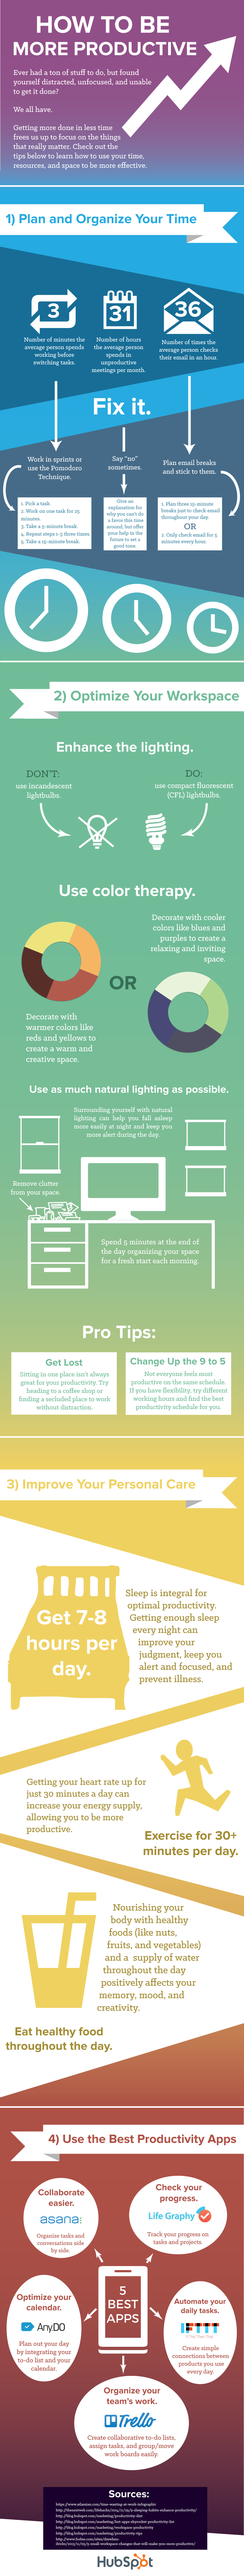 Hubspot Productivity Infographic